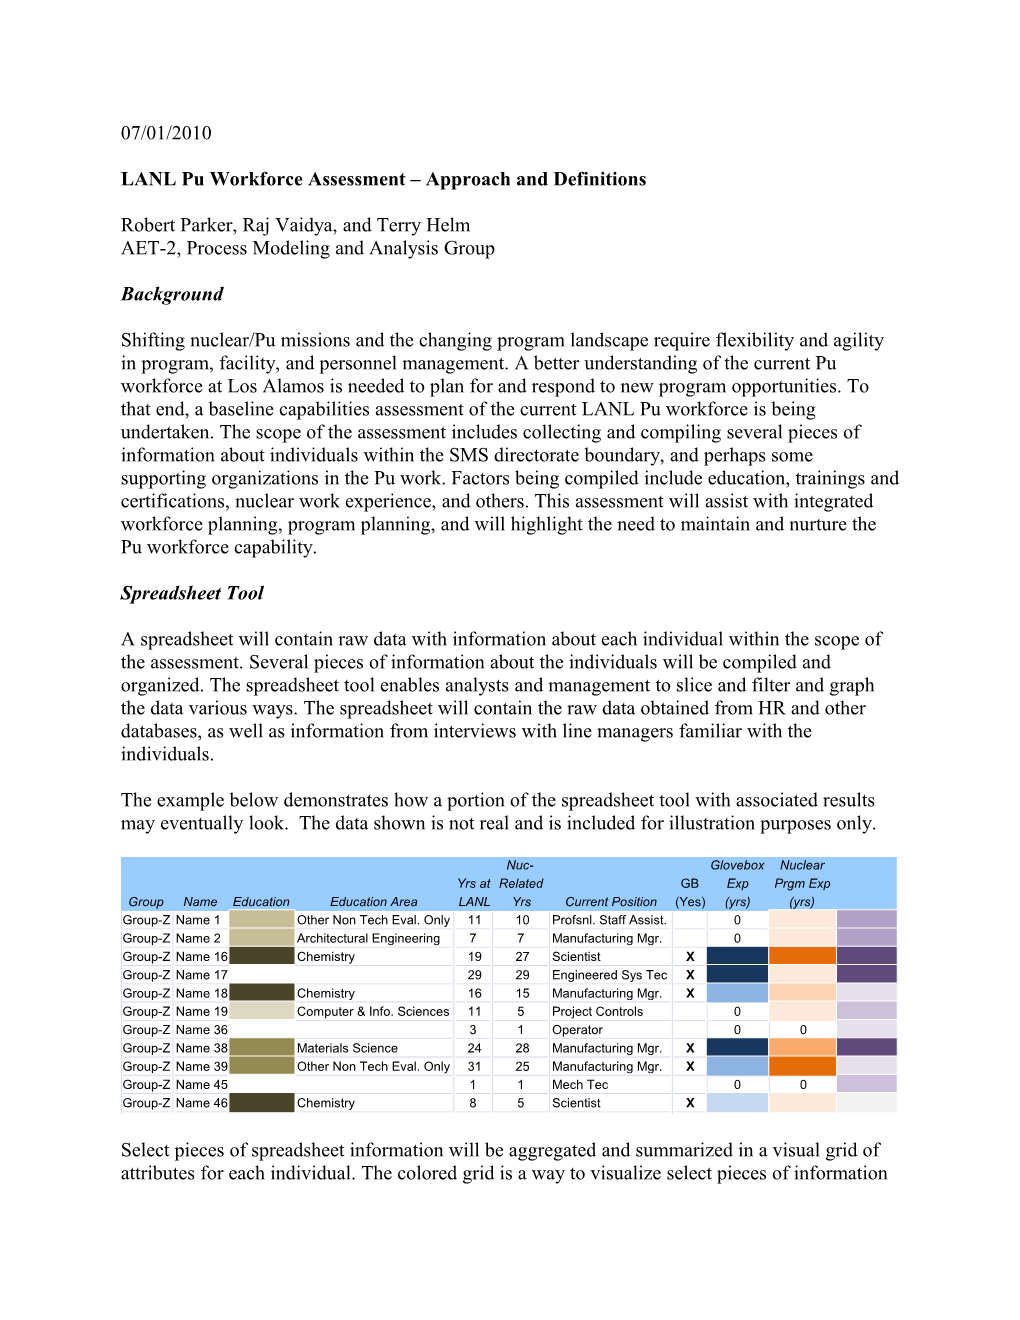 LANL Pu Workforce Assessment Approach and Definitions